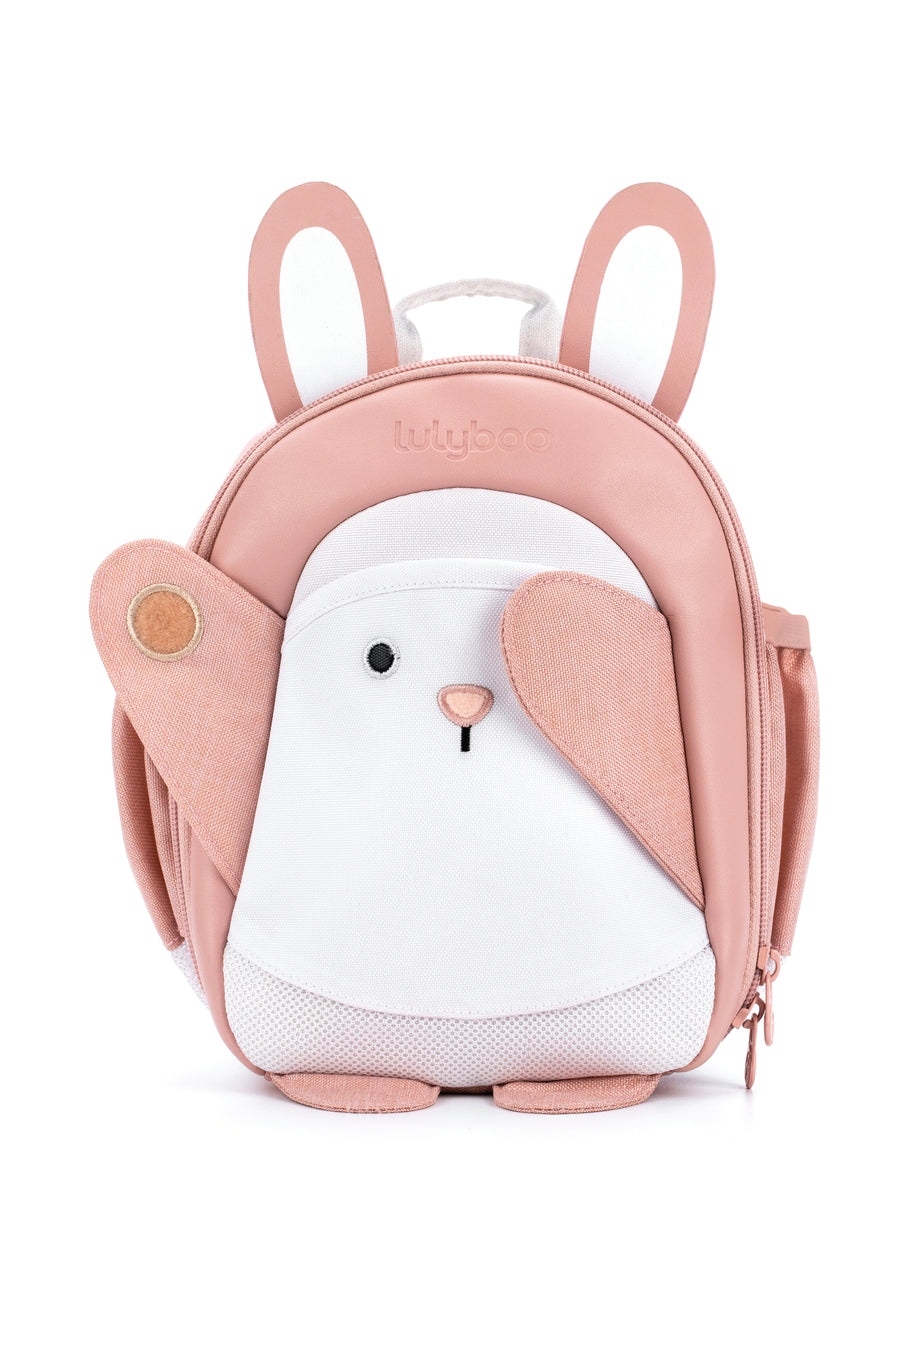 Animal Toddler & Daycare Hiking Backpack NZ-Pink Bunny | Happy Kid